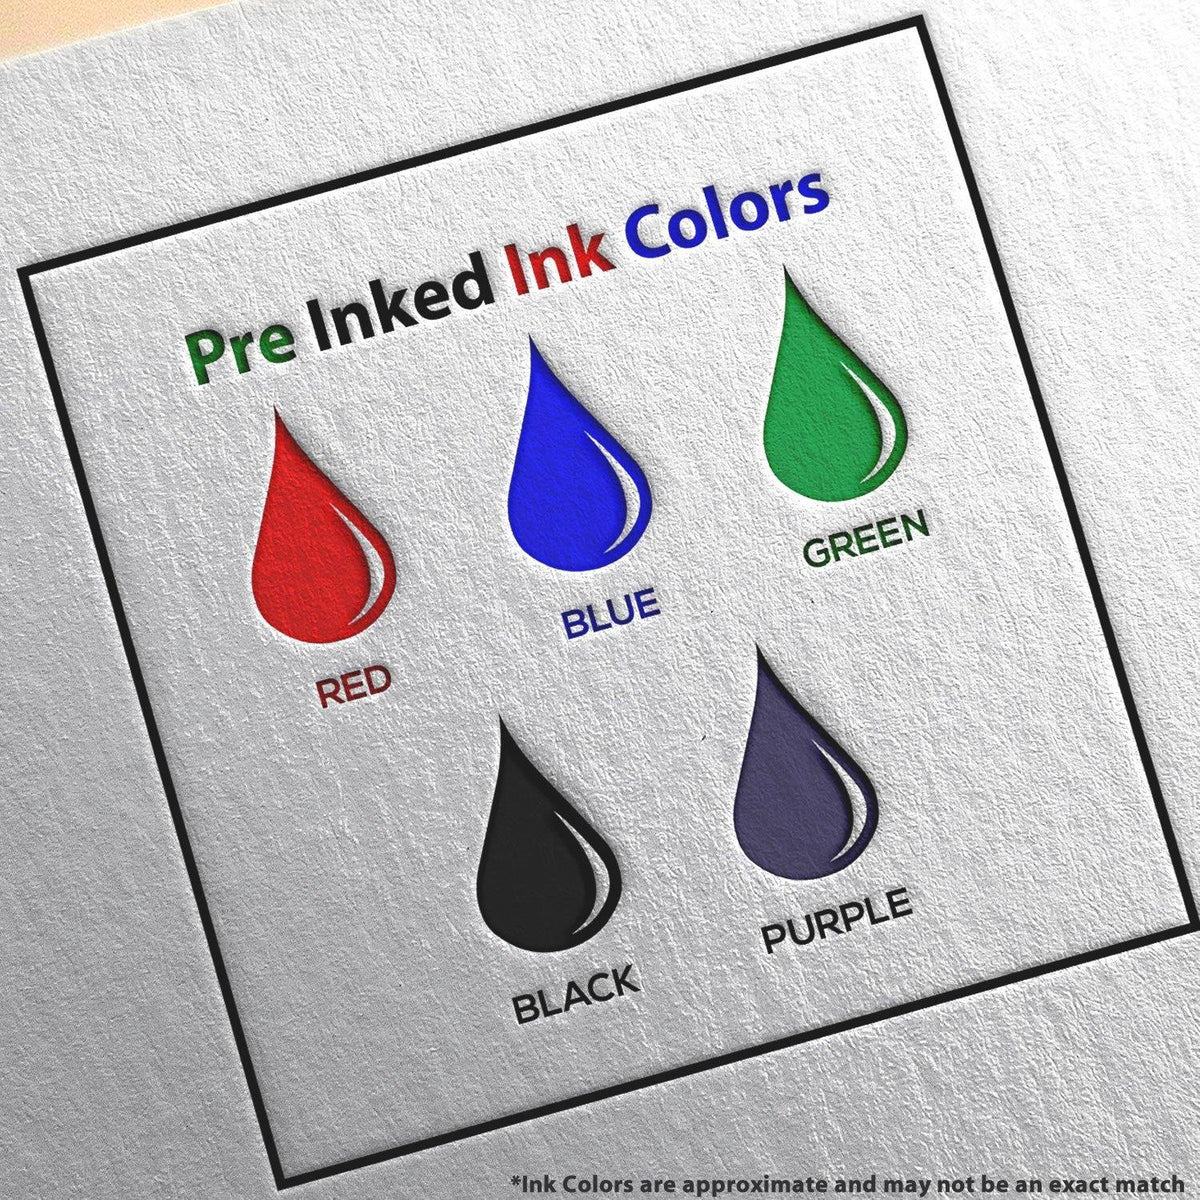 Slim Pre-Inked E-mailed with Date Box Stamp Ink Color Options